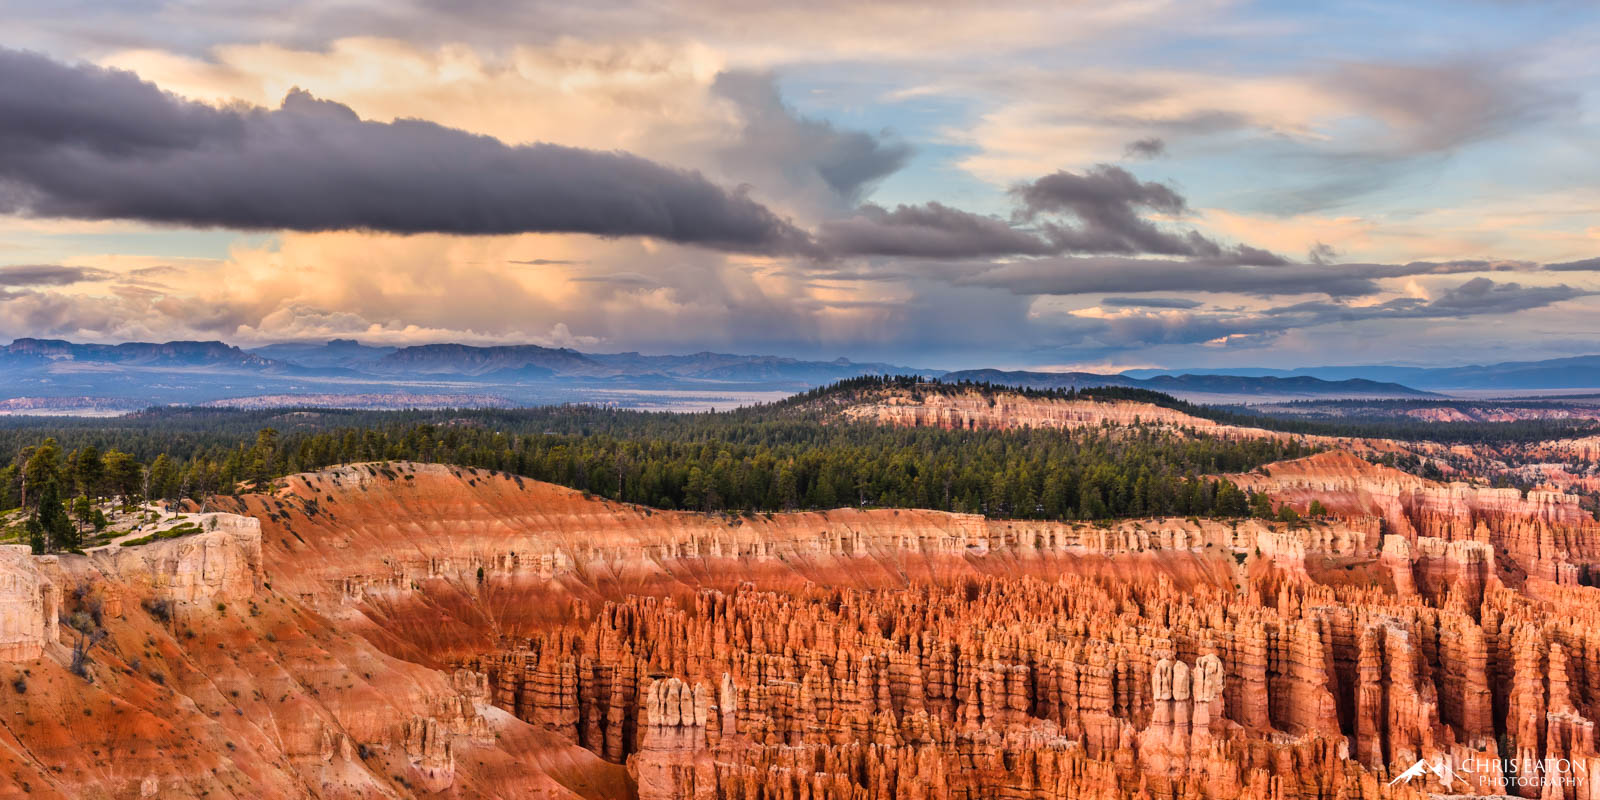 The Silent City is an area of deeply carved and tightly packed hoodoos just below the  rim of the amphitheatre of Bryce Canyon...